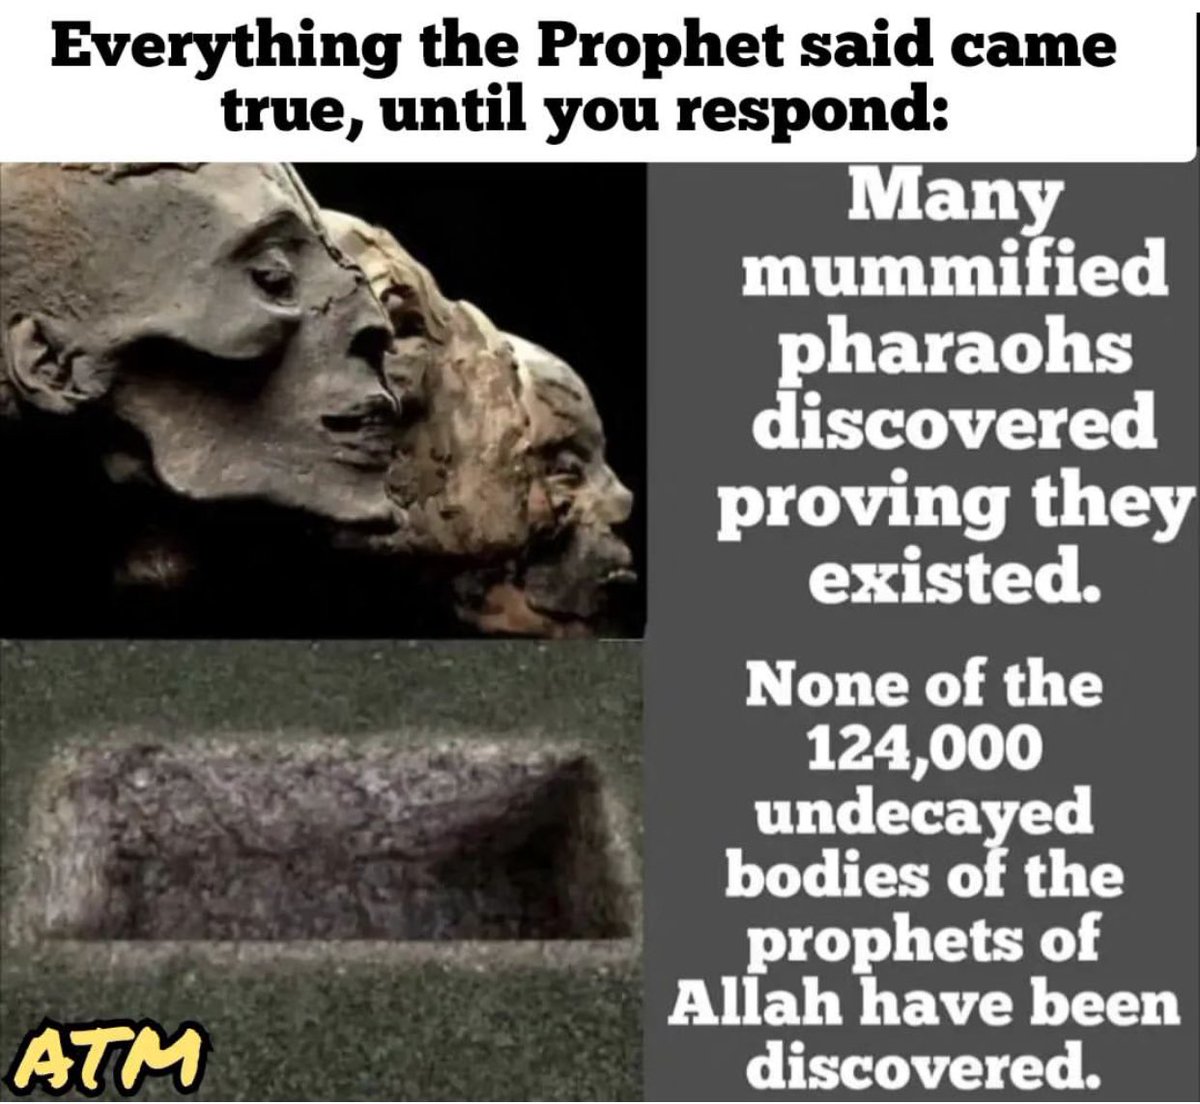 This claim comes from the authentic hadith and indirectly from the Quran:

'The Prophet (PBUH) said: 'Verily, Allah has forbidden the Earth to consume the bodies of the Prophets.'” (Sunan Abî Dâwûd (1047), Sunan al-Nasâ’î (1374), and Sunan Ibn Mâjah (1636).)

'The Prophet (PBUH)